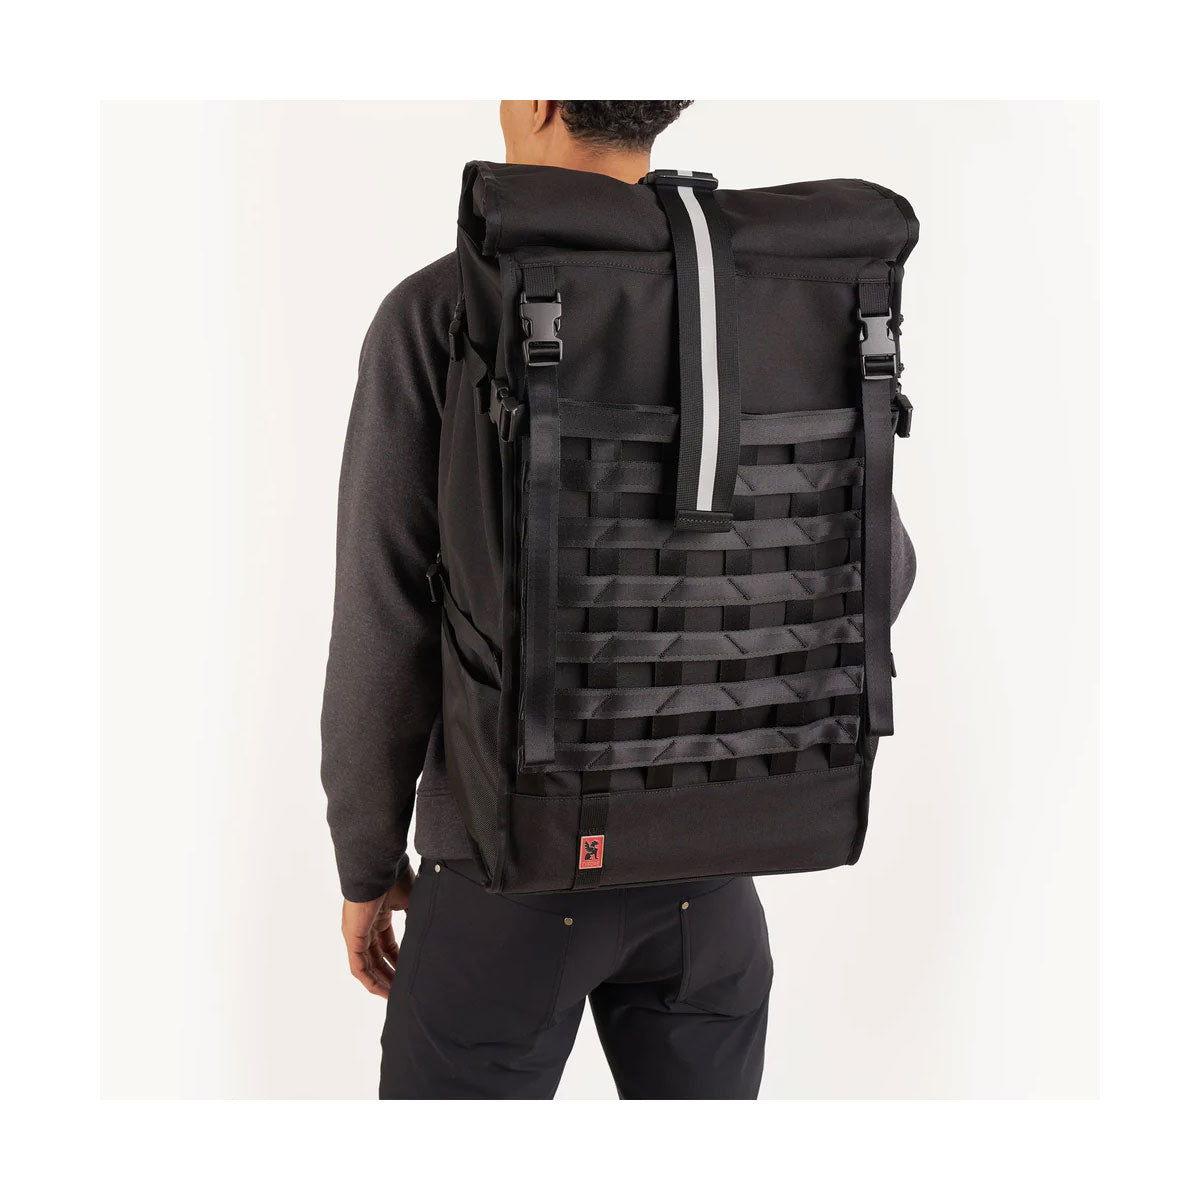 Chrome Industries : Barrage Pro Backpack 80L